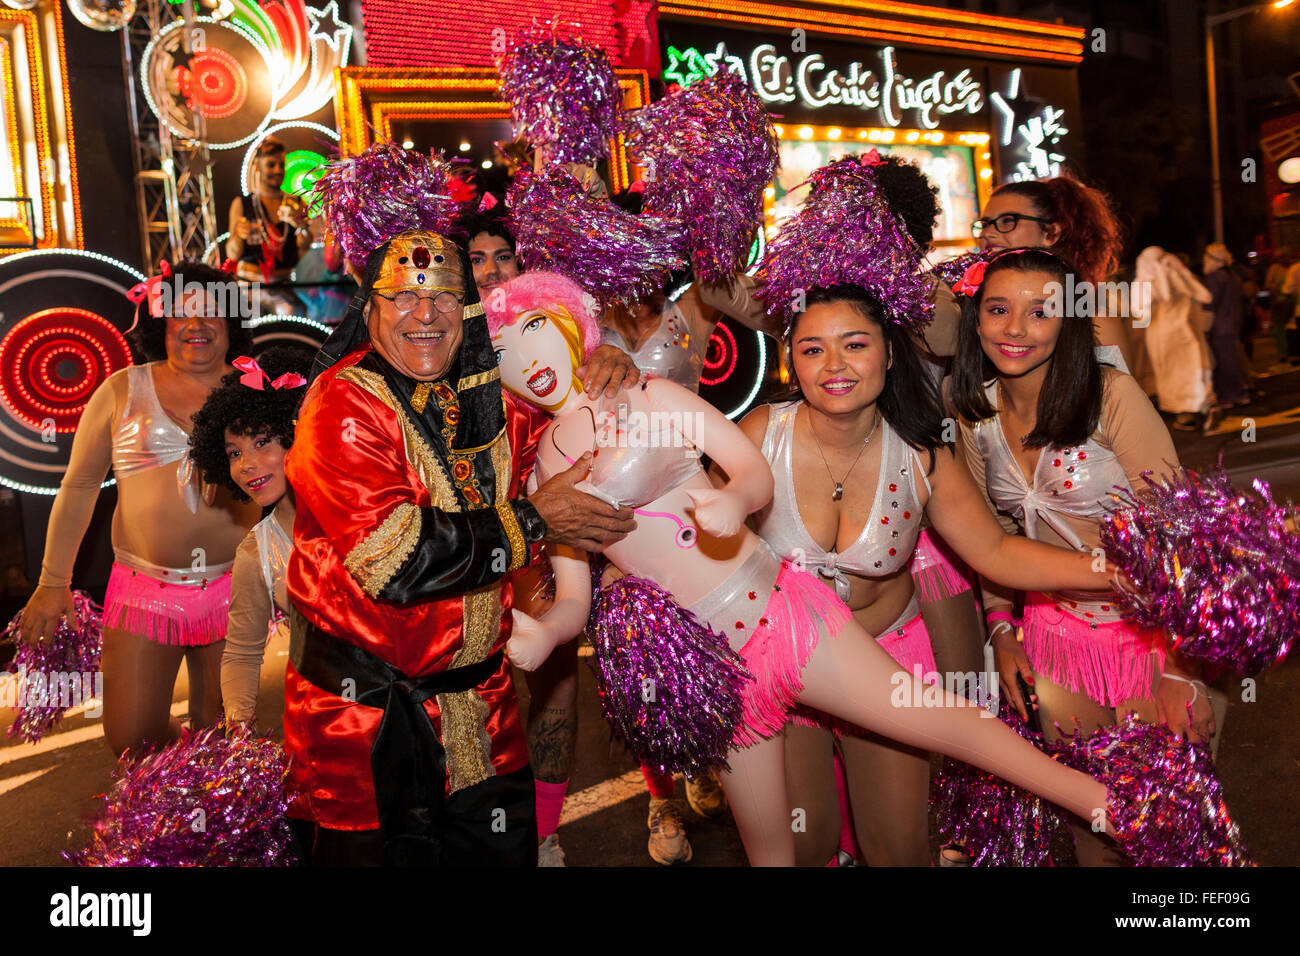 Santa Cruz, Tenerife. 5 Feb 2016. Characters, dancers and floats at the opening parade of the Carnaval de Santa Cruz de Tenerife. Thousands of people in groups of dancers, murgas, comparsas, and general fancy dress celebrate the official start to Carnival with the night parade through the streets of Santa Cruz. Stock Photo